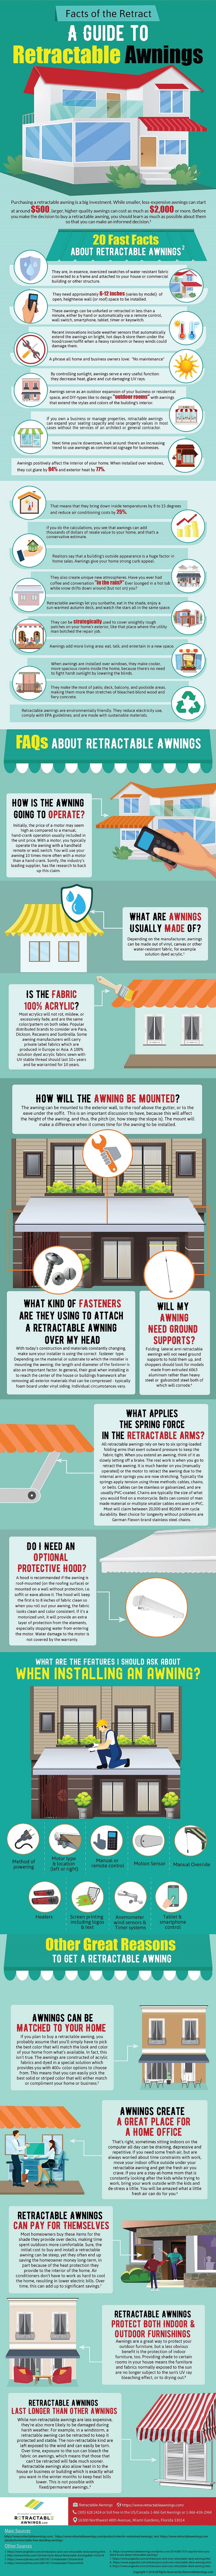 Guide to Retractable Awnings: Facts of the Retract